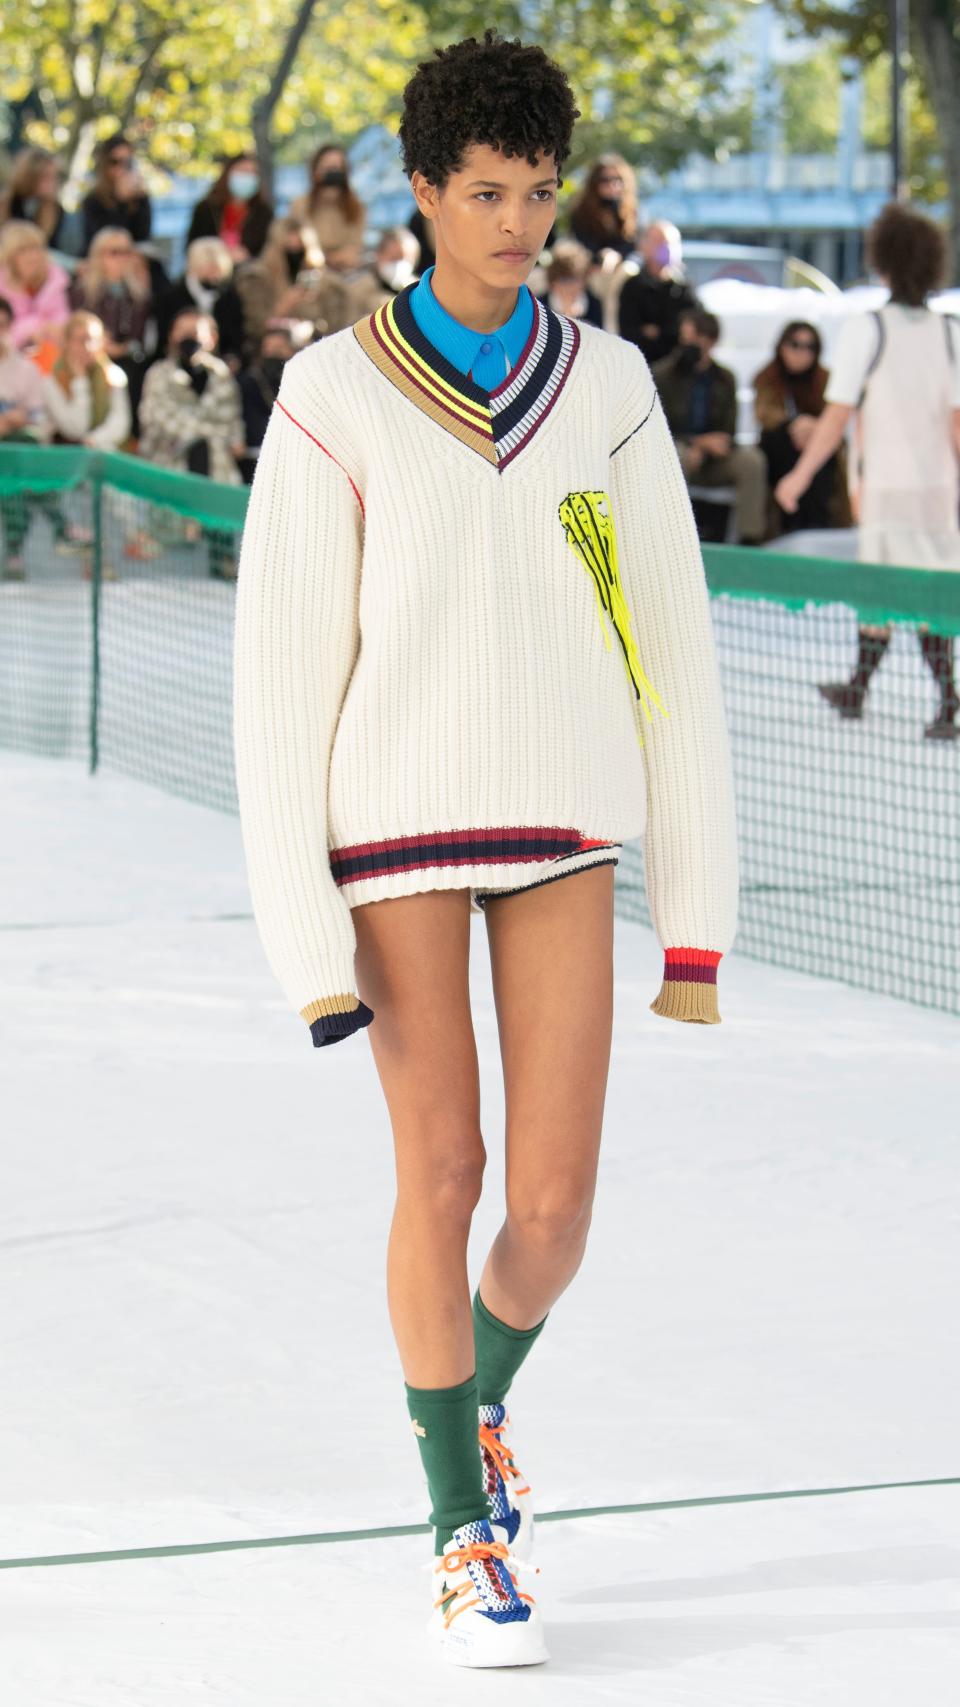 <h2>Summer 2022 Trend: Back-To-School</h2> <br>It's time to hit the books because preppy back-to-school styles were all over the runways ranging from Miu Miu to Lacoste and Coach. This summer, lean into the more athletic-inspired styles like <a href="https://www.refinery29.com/en-us/tennis-skirts" rel="nofollow noopener" target="_blank" data-ylk="slk:tennis skirts" class="link ">tennis skirts</a> and <a href="https://www.refinery29.com/en-us/2021/05/10483982/skorts-trend-tiktok" rel="nofollow noopener" target="_blank" data-ylk="slk:skorts" class="link ">skorts</a>, as well as playful varsity sweaters and <a href="https://www.refinery29.com/en-us/chunky-loafers" rel="nofollow noopener" target="_blank" data-ylk="slk:chunky loafers" class="link ">chunky loafers</a>.<span class="copyright">Photo: Yanis Vlamos</span>